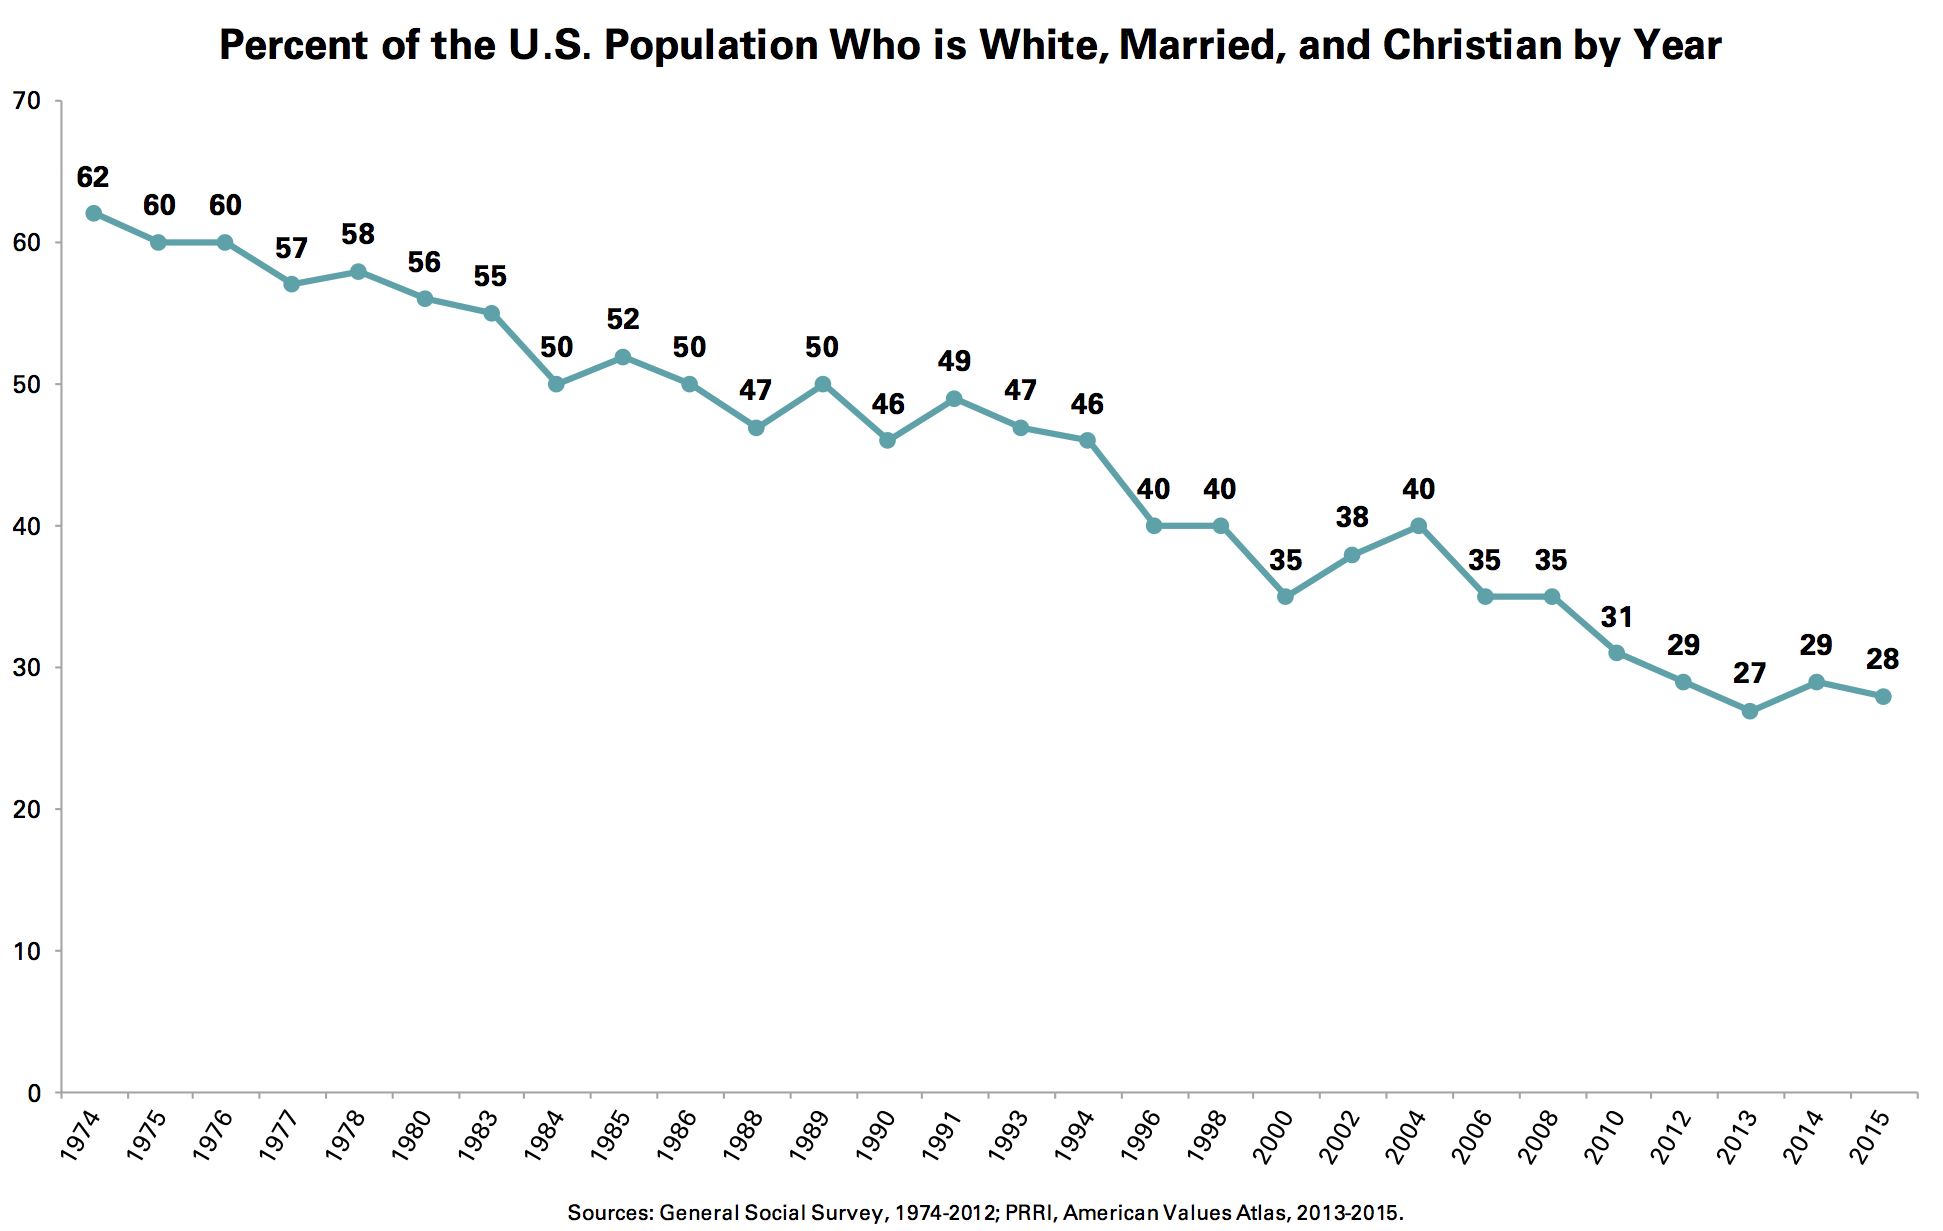 Percent-of-US-Population-Who-is-White-Married-Christian-by-Year.jpg